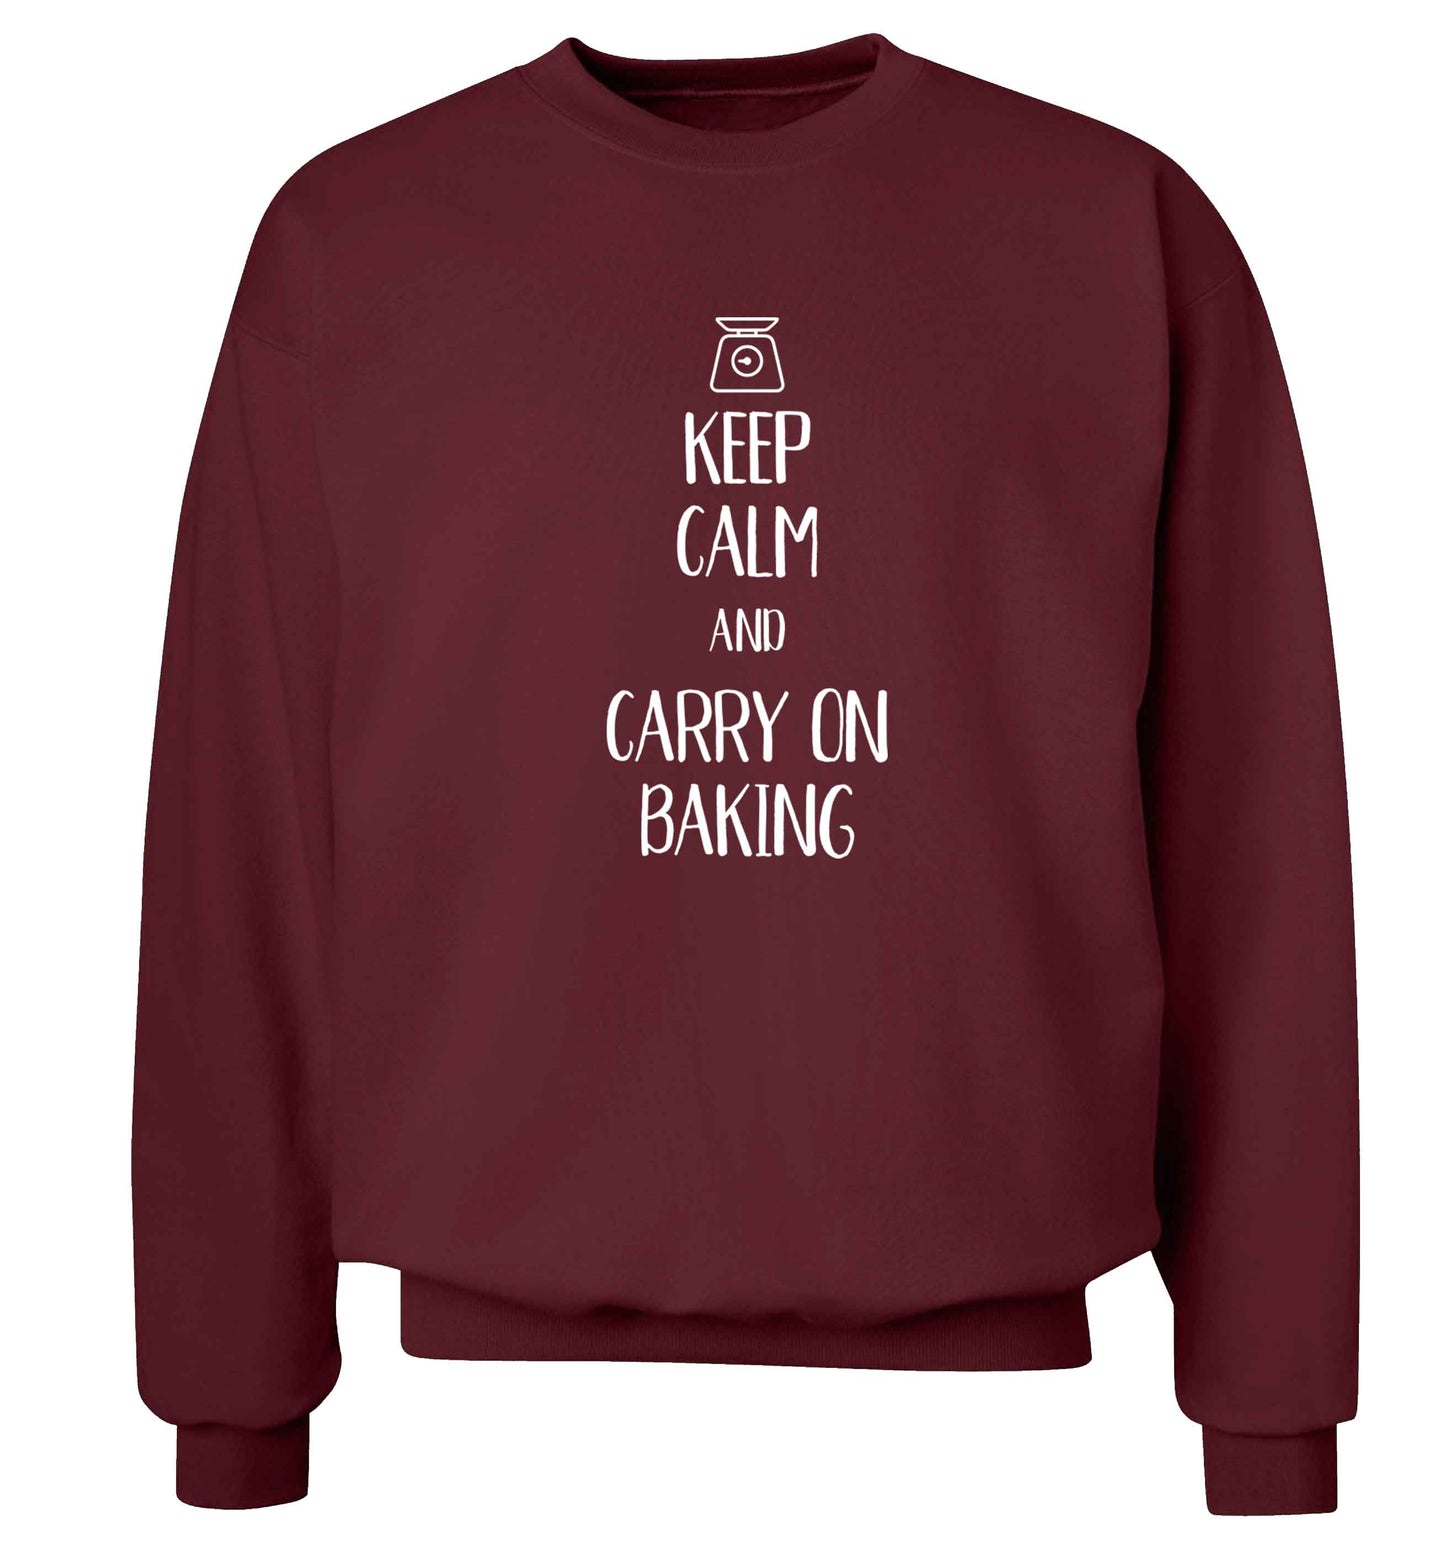 Keep calm and carry on baking Adult's unisex maroon Sweater 2XL